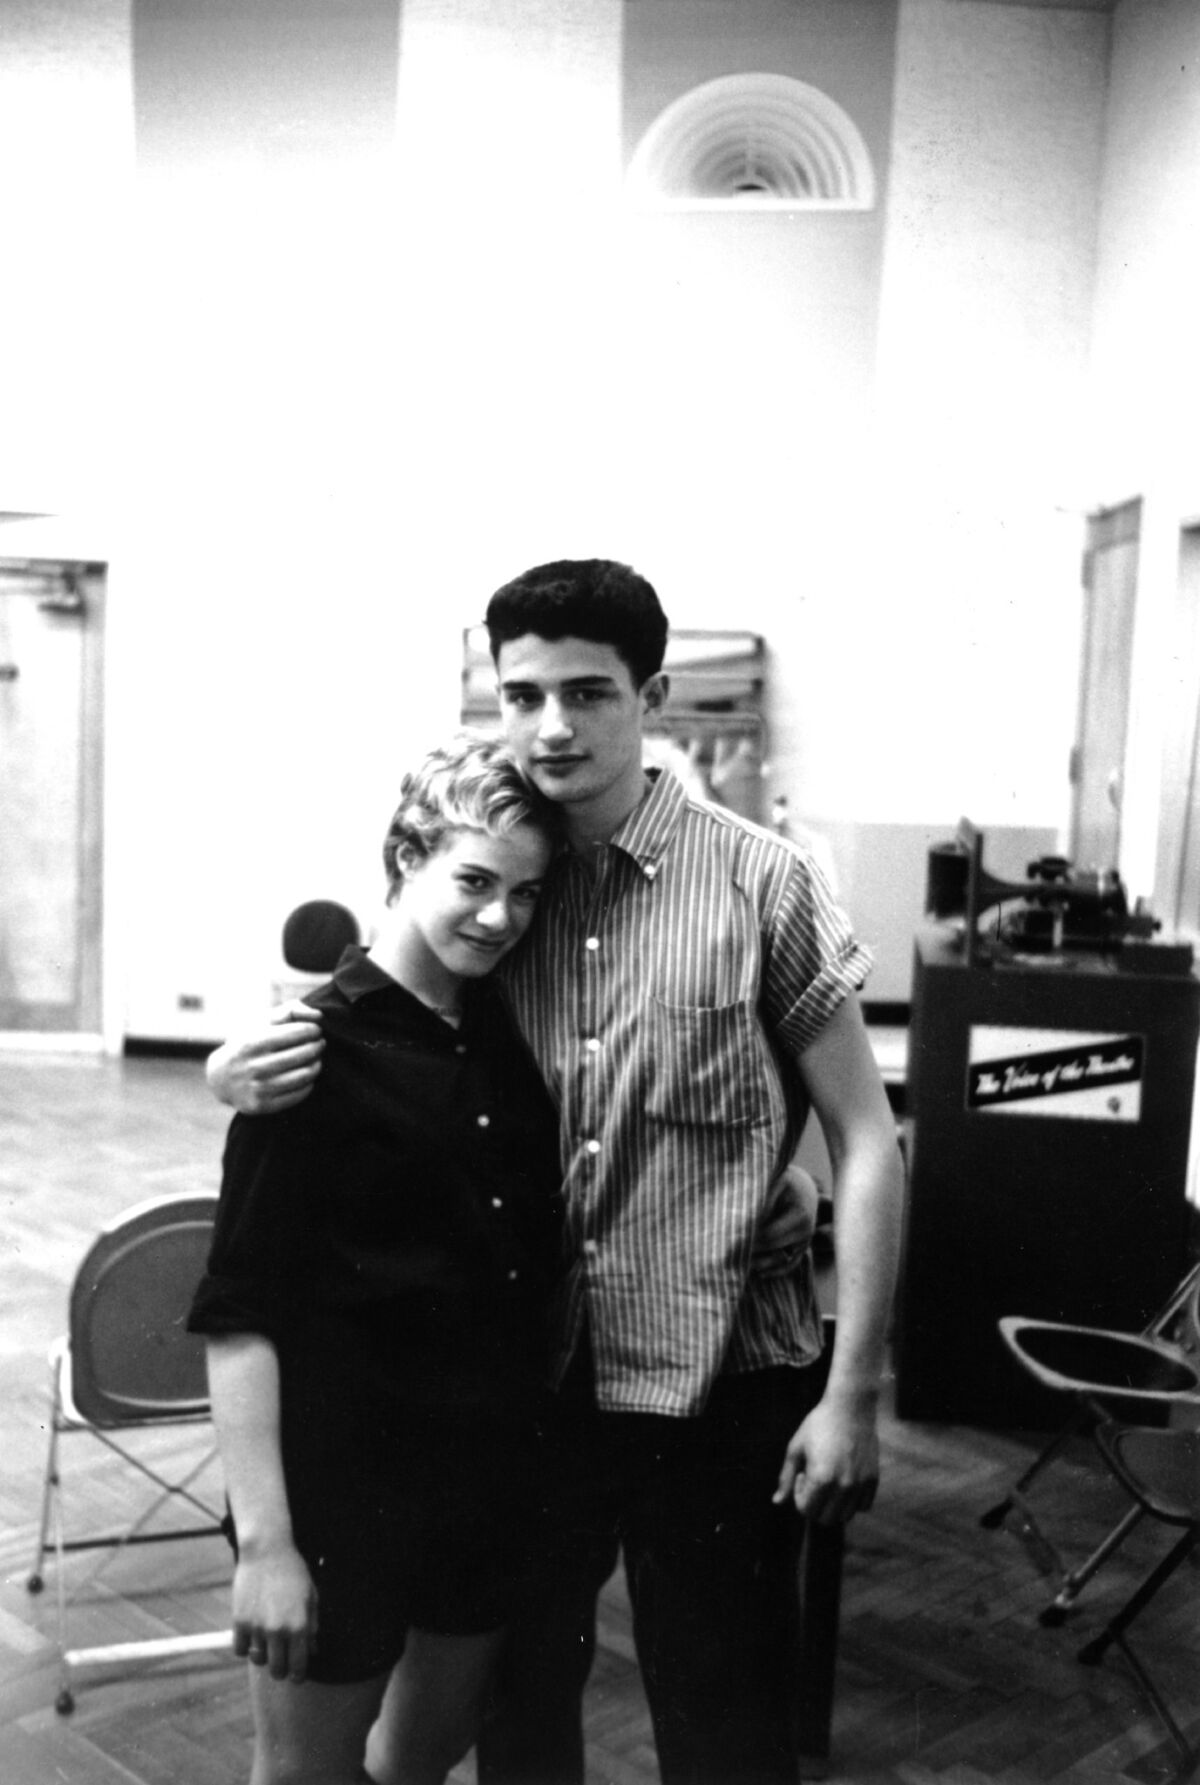 Husband and wife songwriting team Carole King and Gerry Goffin pose in a recording studio in New York, circa 1959.